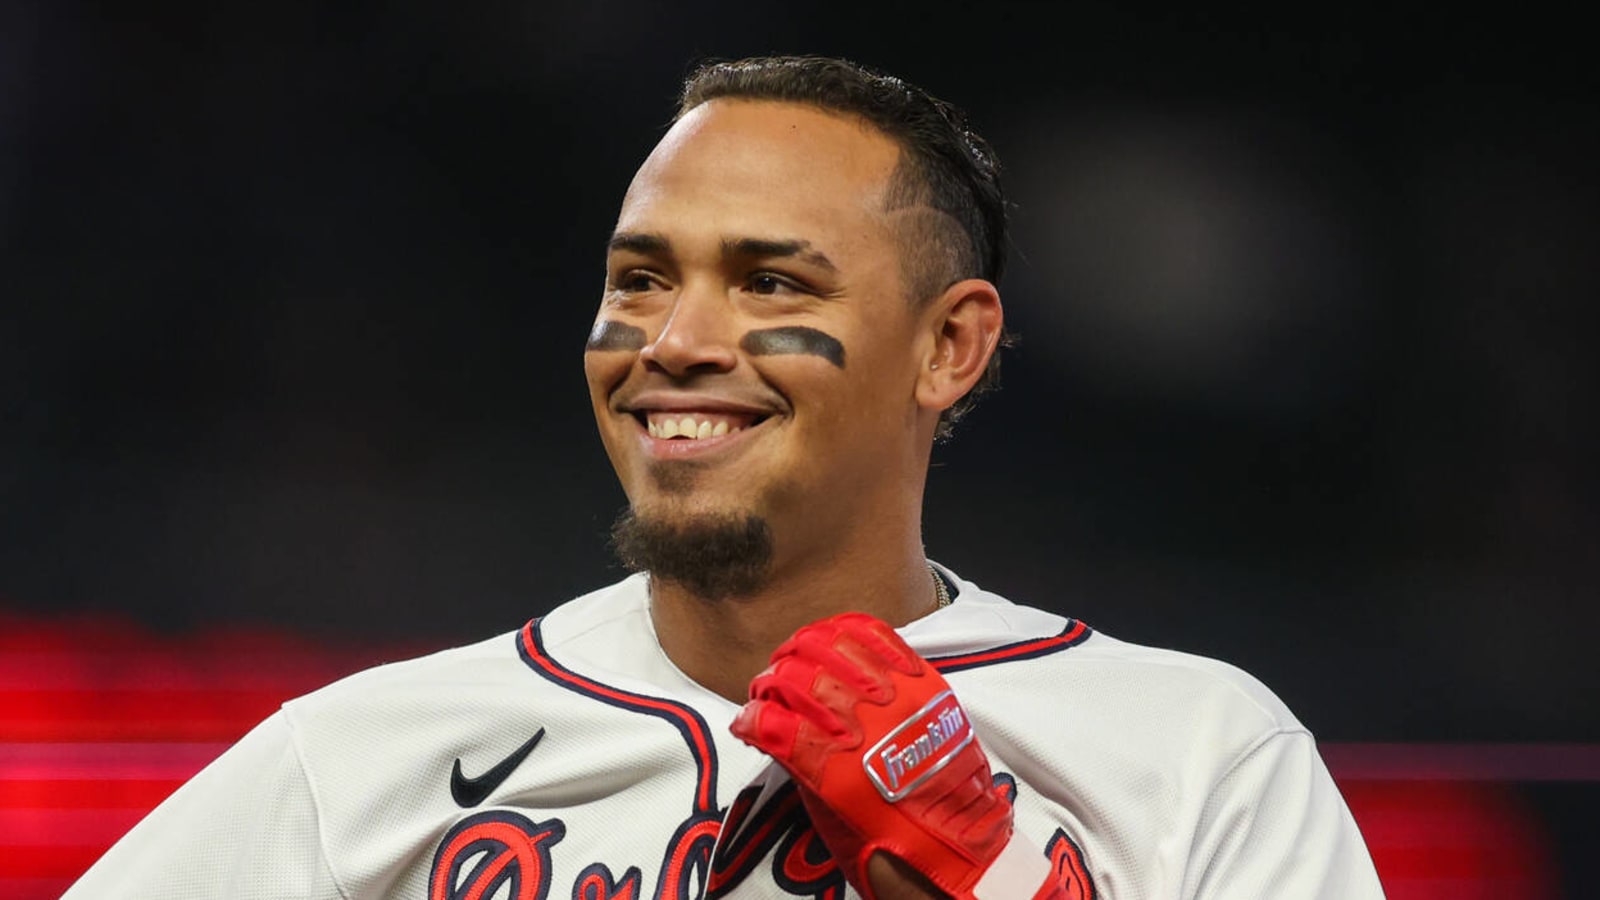 Is Orlando Arcia the Braves shortstop of the future?